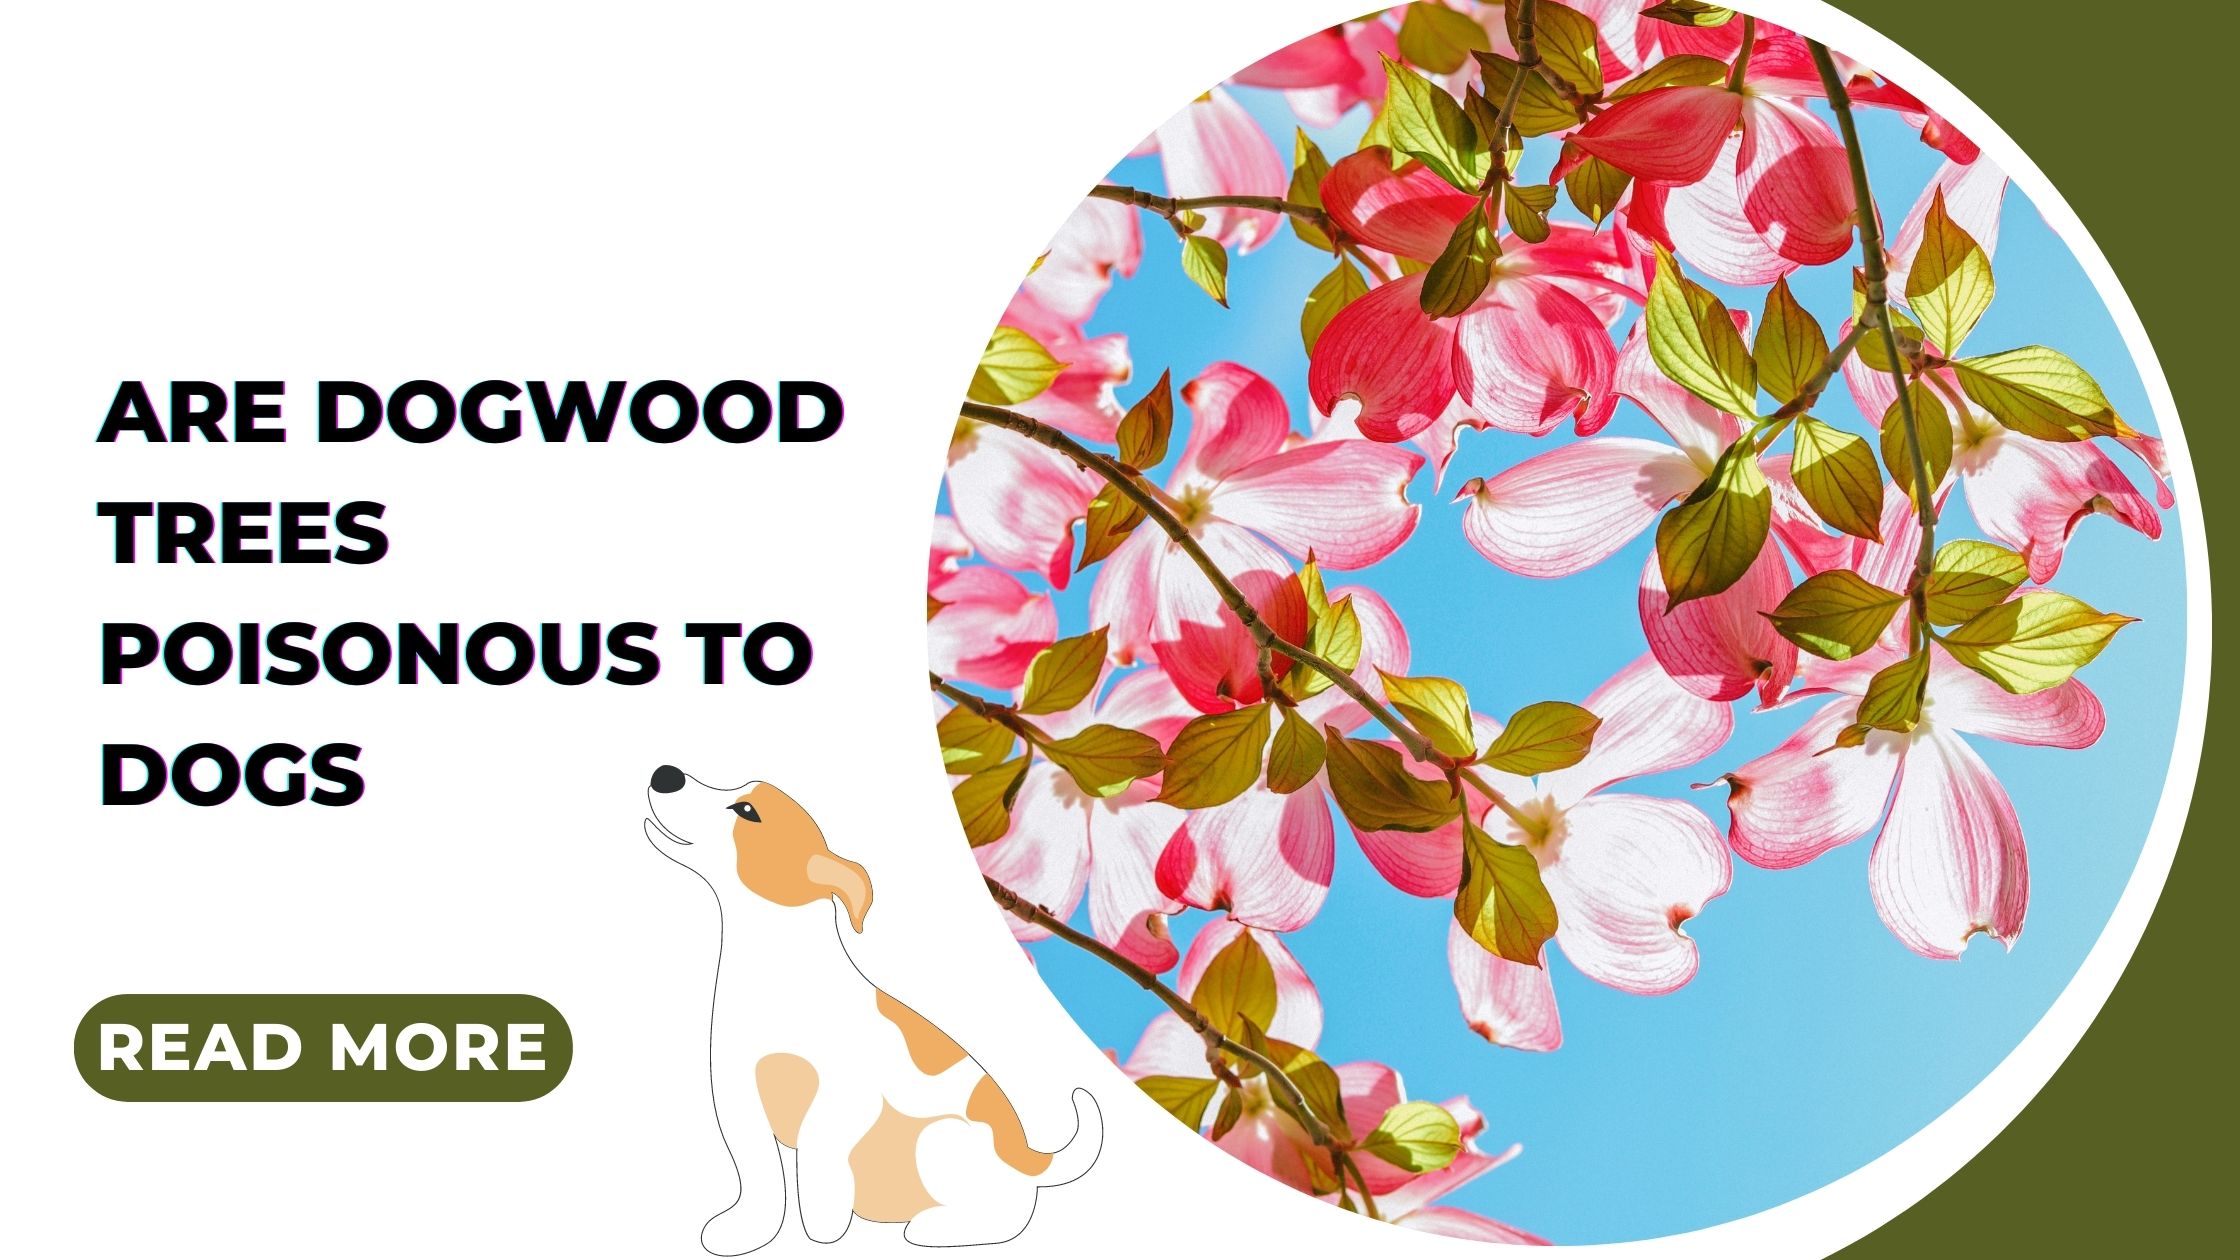 Are Dogwood Trees Poisonous to Dogs